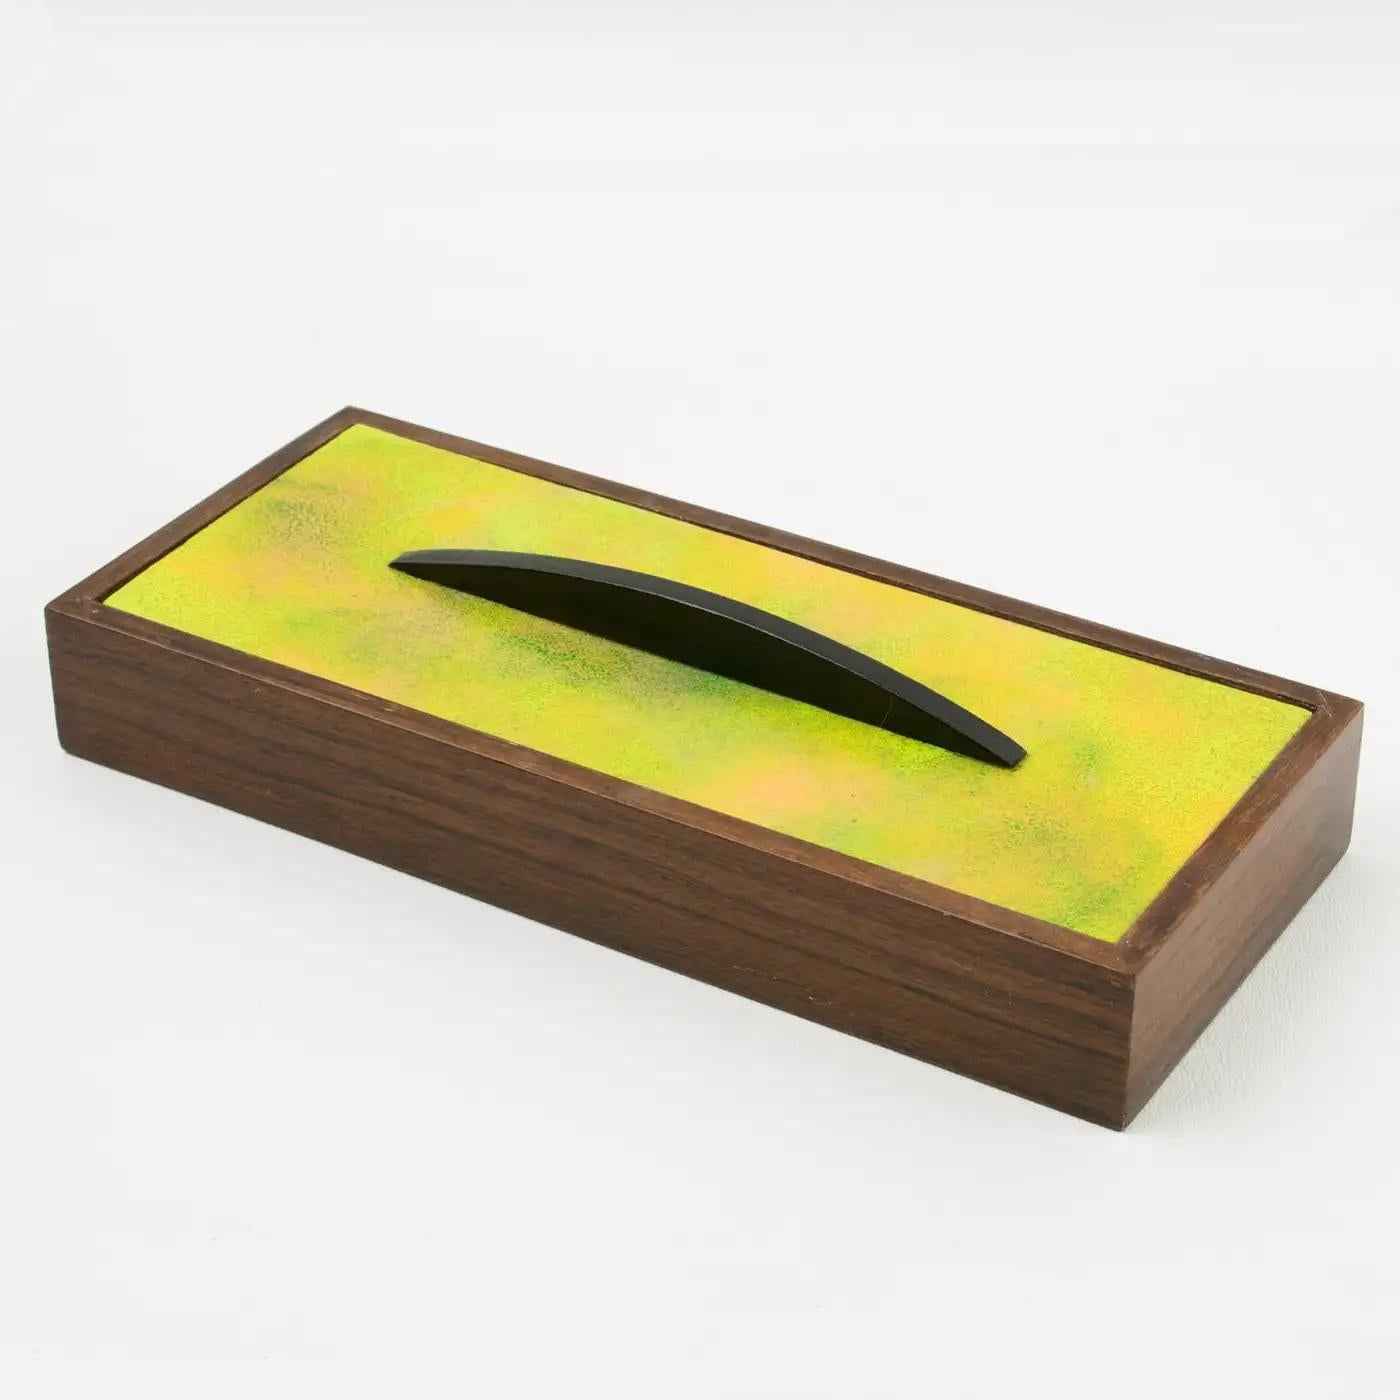 Mid-Century Modern Paolo De Poli Wood and Enamel Box, Italy 1950s For Sale